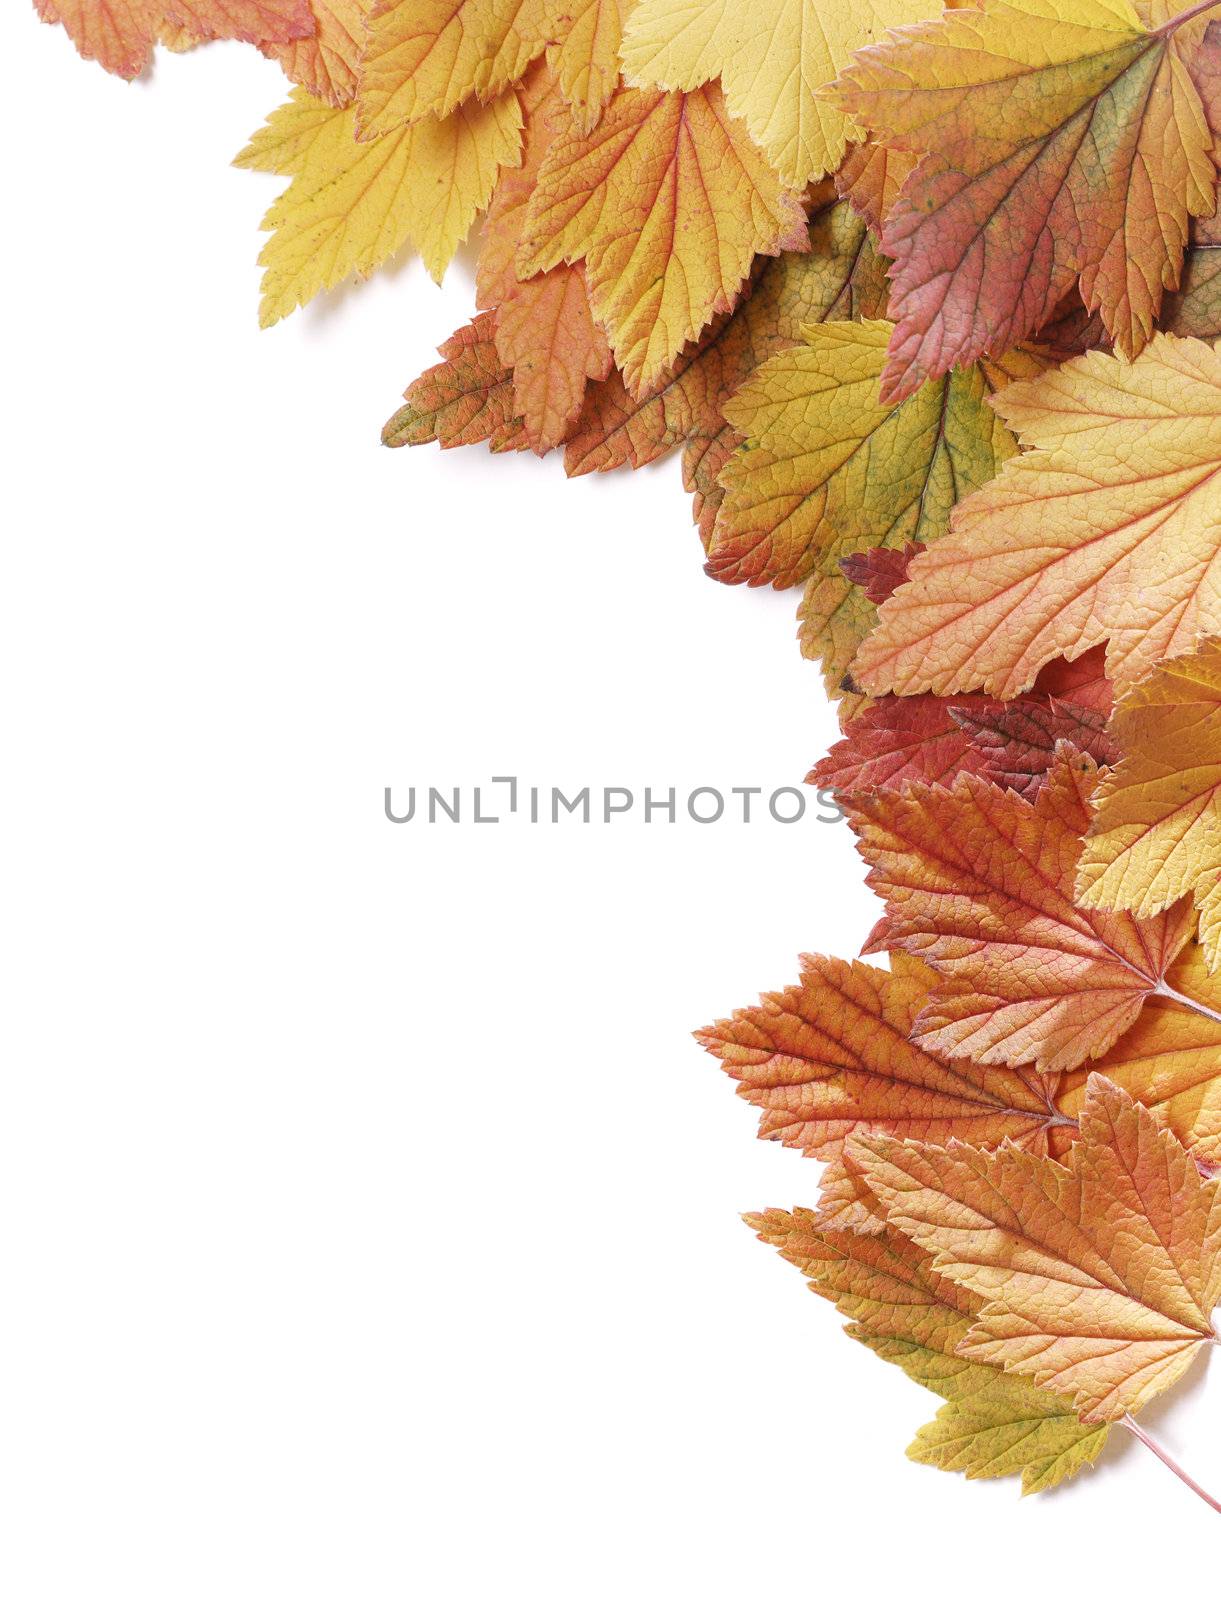 Autumn leaves from a currant bush